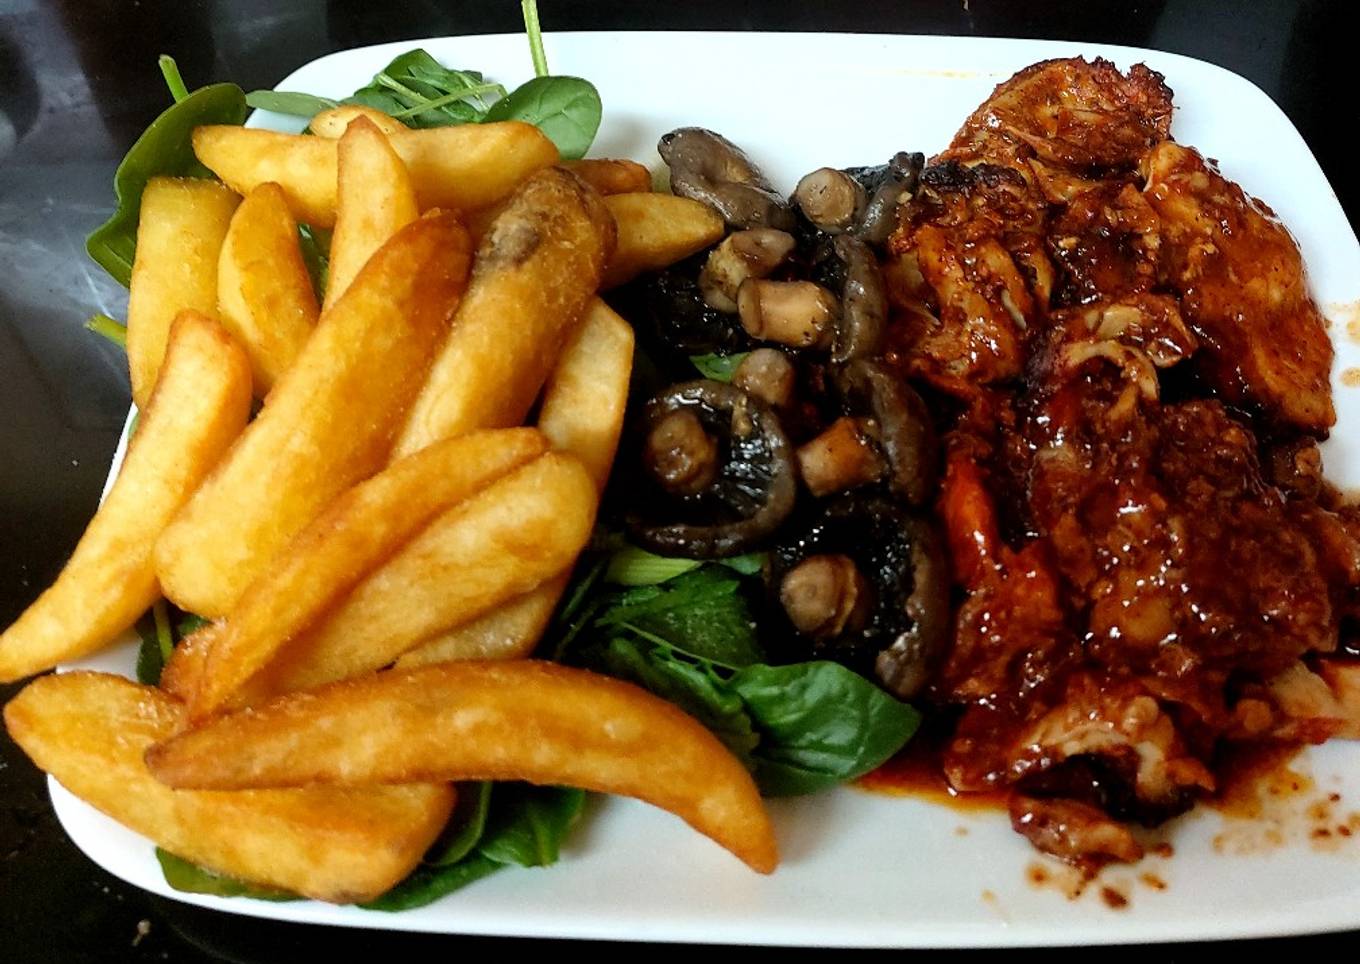 My Peri Peri Chicken with Mushrooms and Big Chips + Spinach